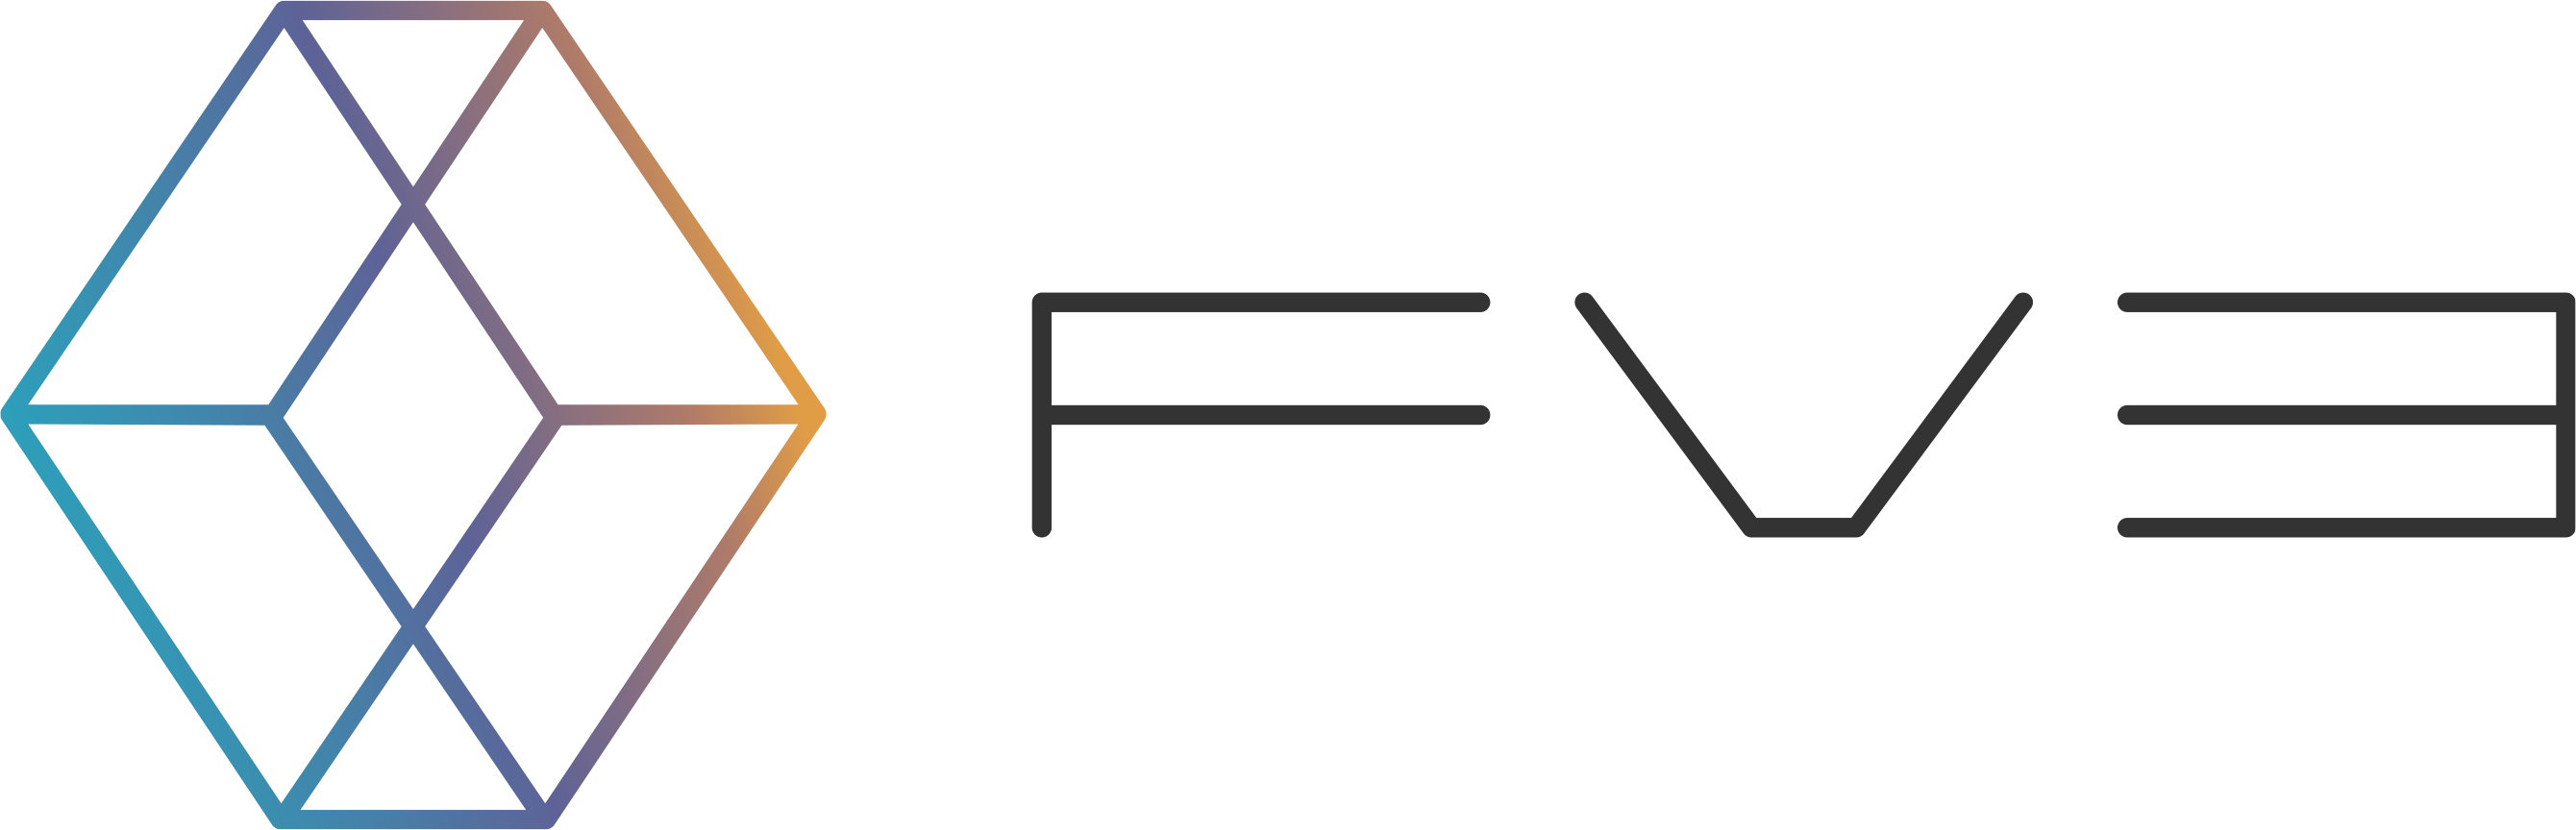 Entertainment Marketing Agency FlyteVu Launches FV3, A New Division That Builds The Bridge To The Metaverse For Brands